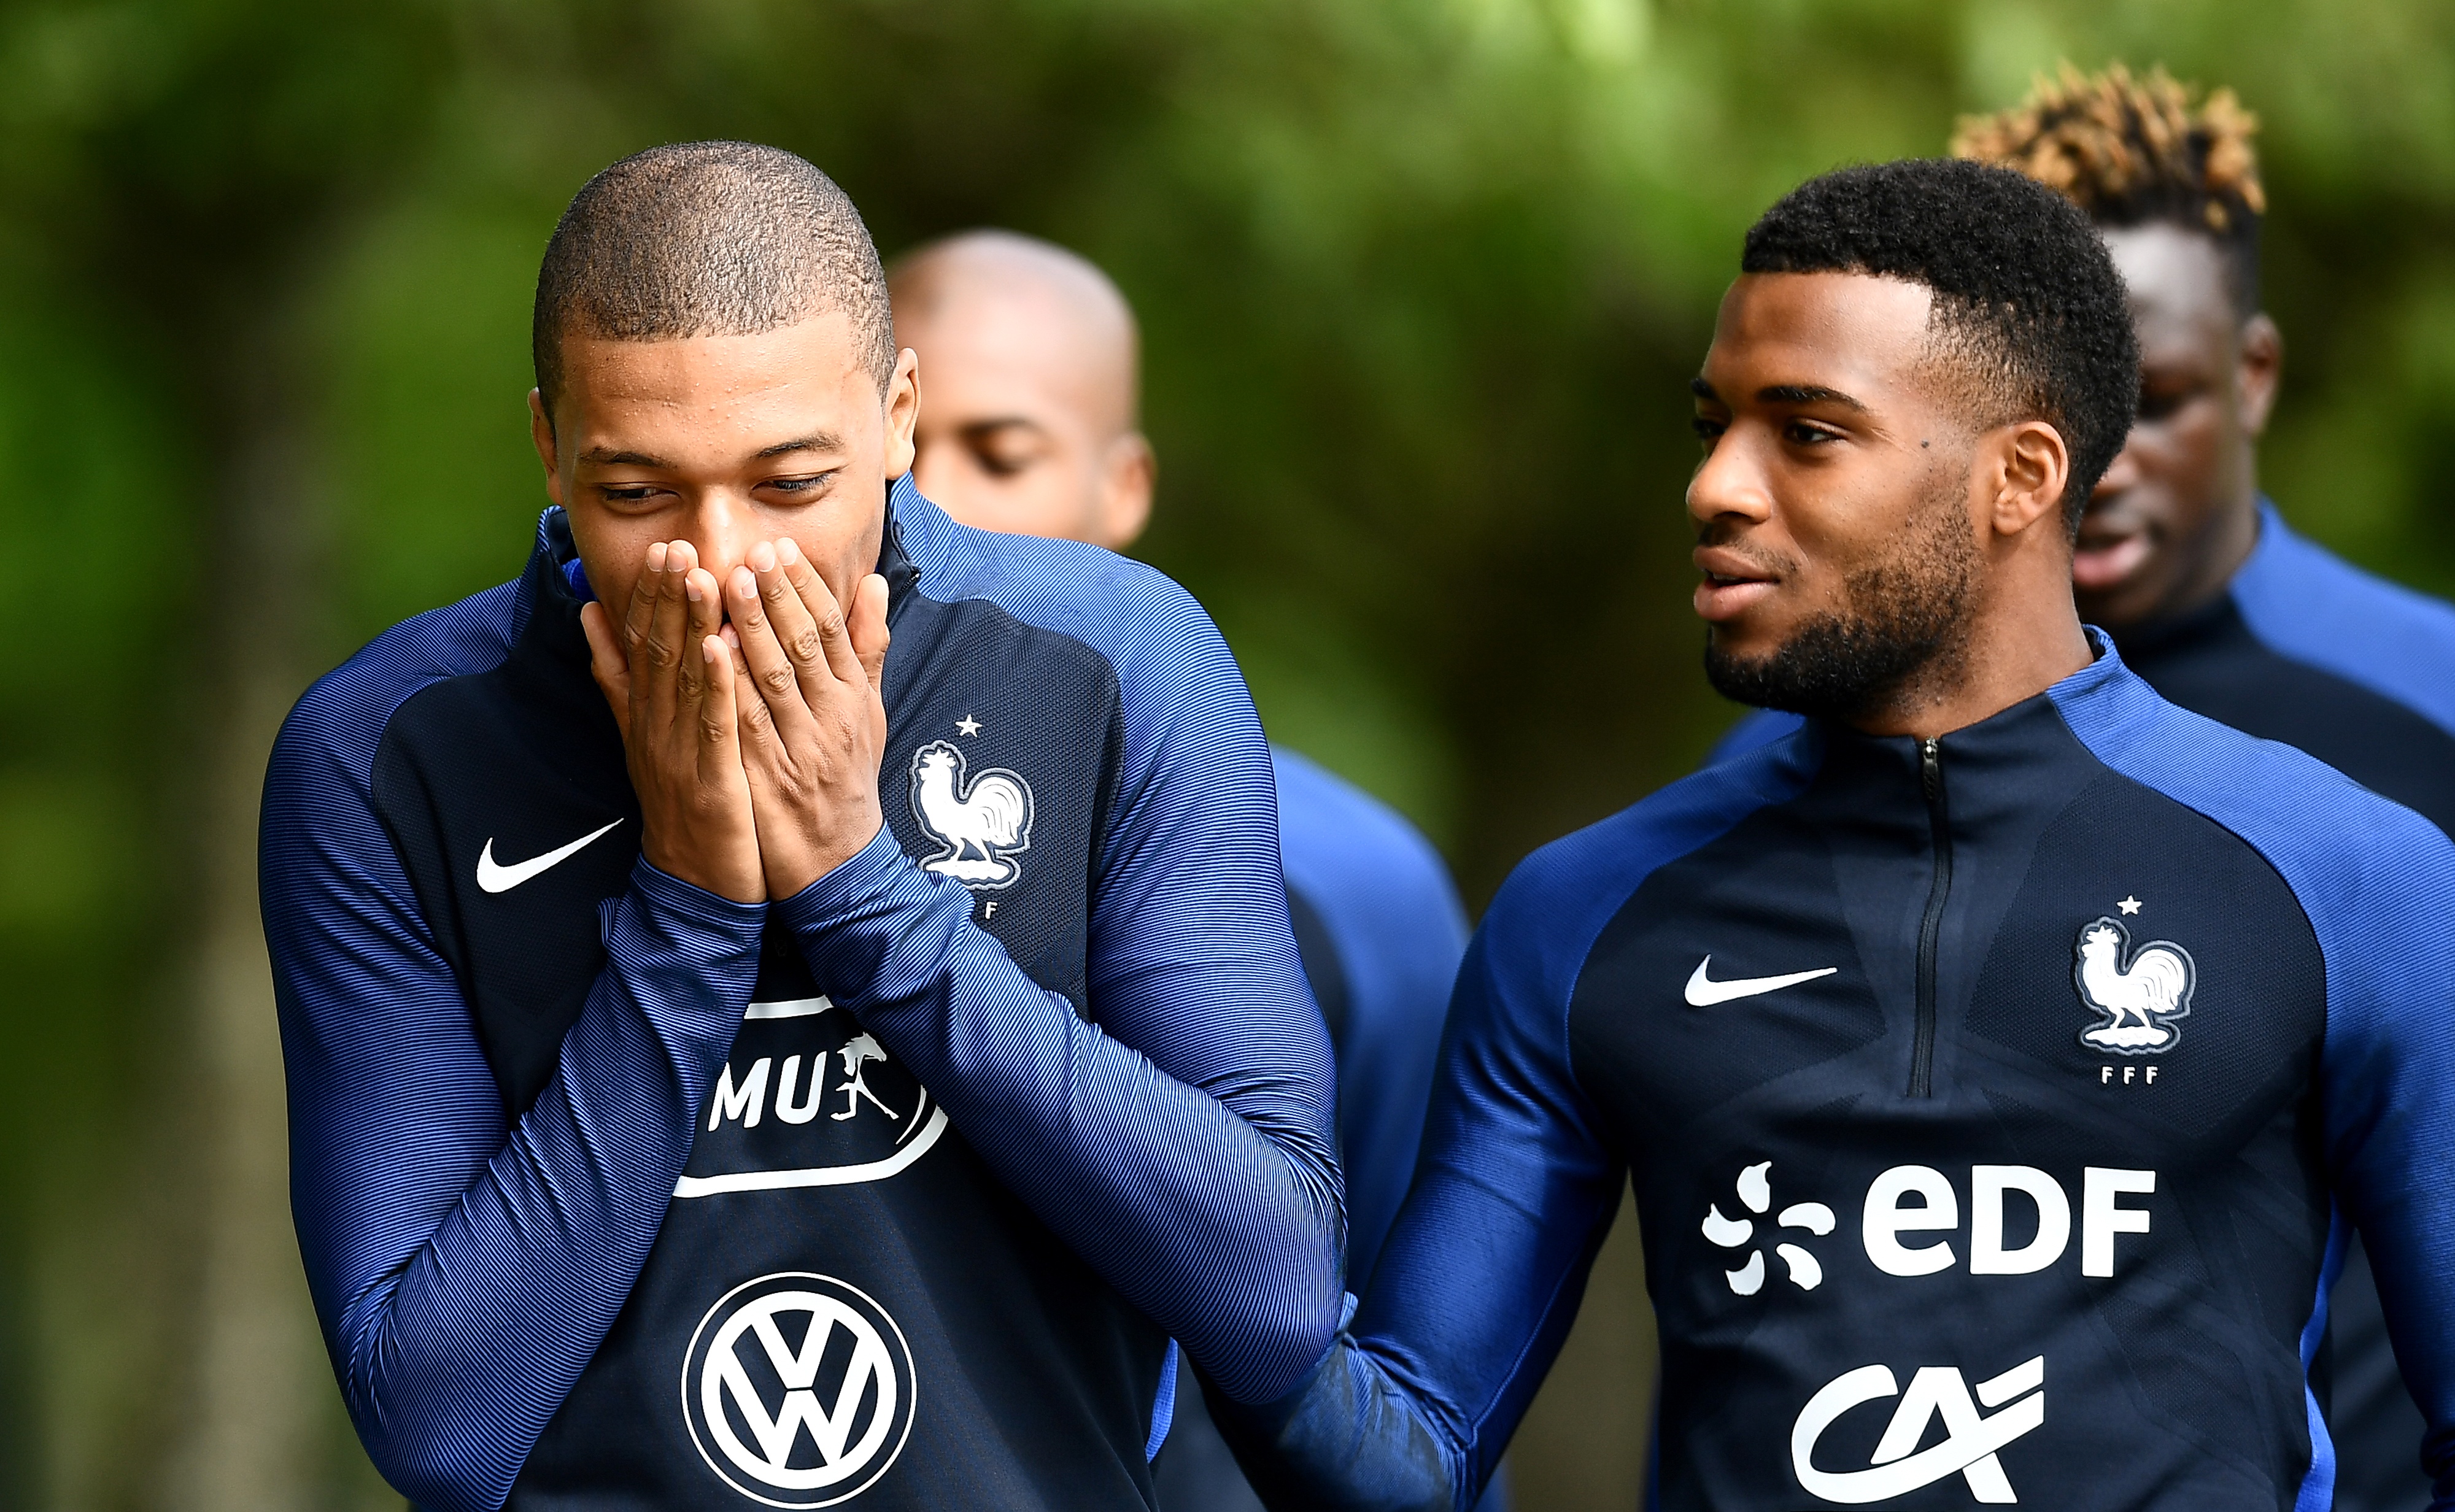 France's forward Kylian Mbappe jokes with France's forward Thomas Lemar (R) before a training session in Clairefontaine-en-Yvelines on May 30, 2017.
Team France prepares for the friendly football match against Paraguay to be held on June 2 and World Cup qualifier against Sweden on June 9. / AFP PHOTO / FRANCK FIFE        (Photo credit should read FRANCK FIFE/AFP/Getty Images)